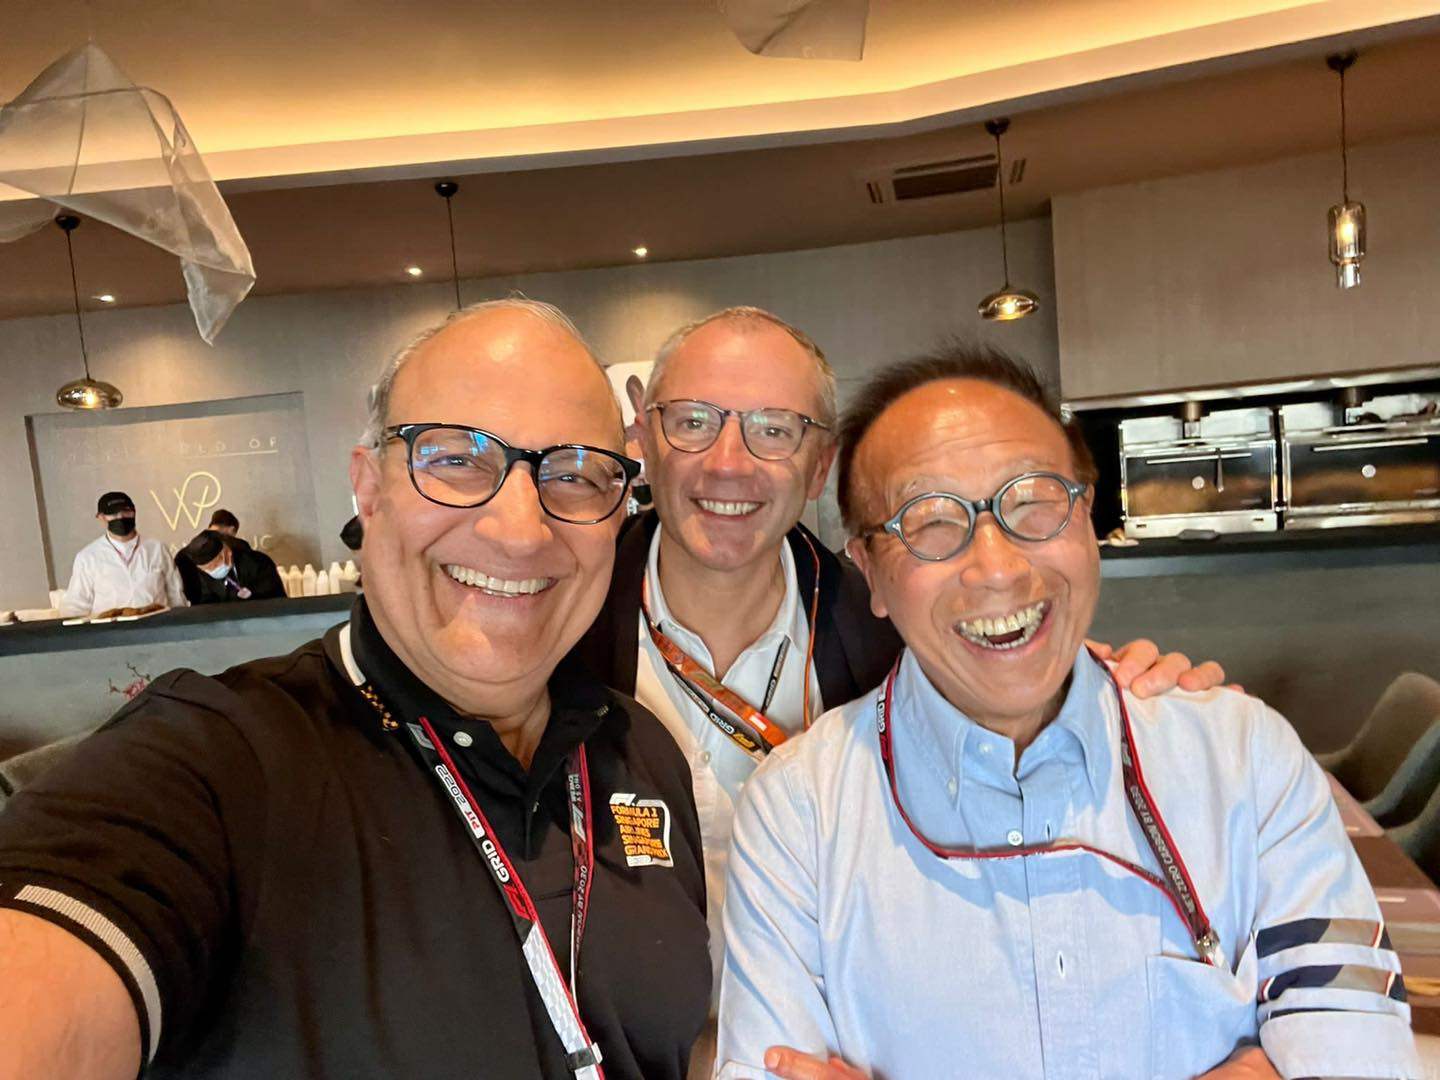 Singapore’s Transport Minister S. Iswaran (left) with Formula One group chief executive Stefano Domenicali and HPL co-founder Ong Beng Seng (right) during the 2022 Singapore Formula One grand prix. Photo: Facebook/SIswaran